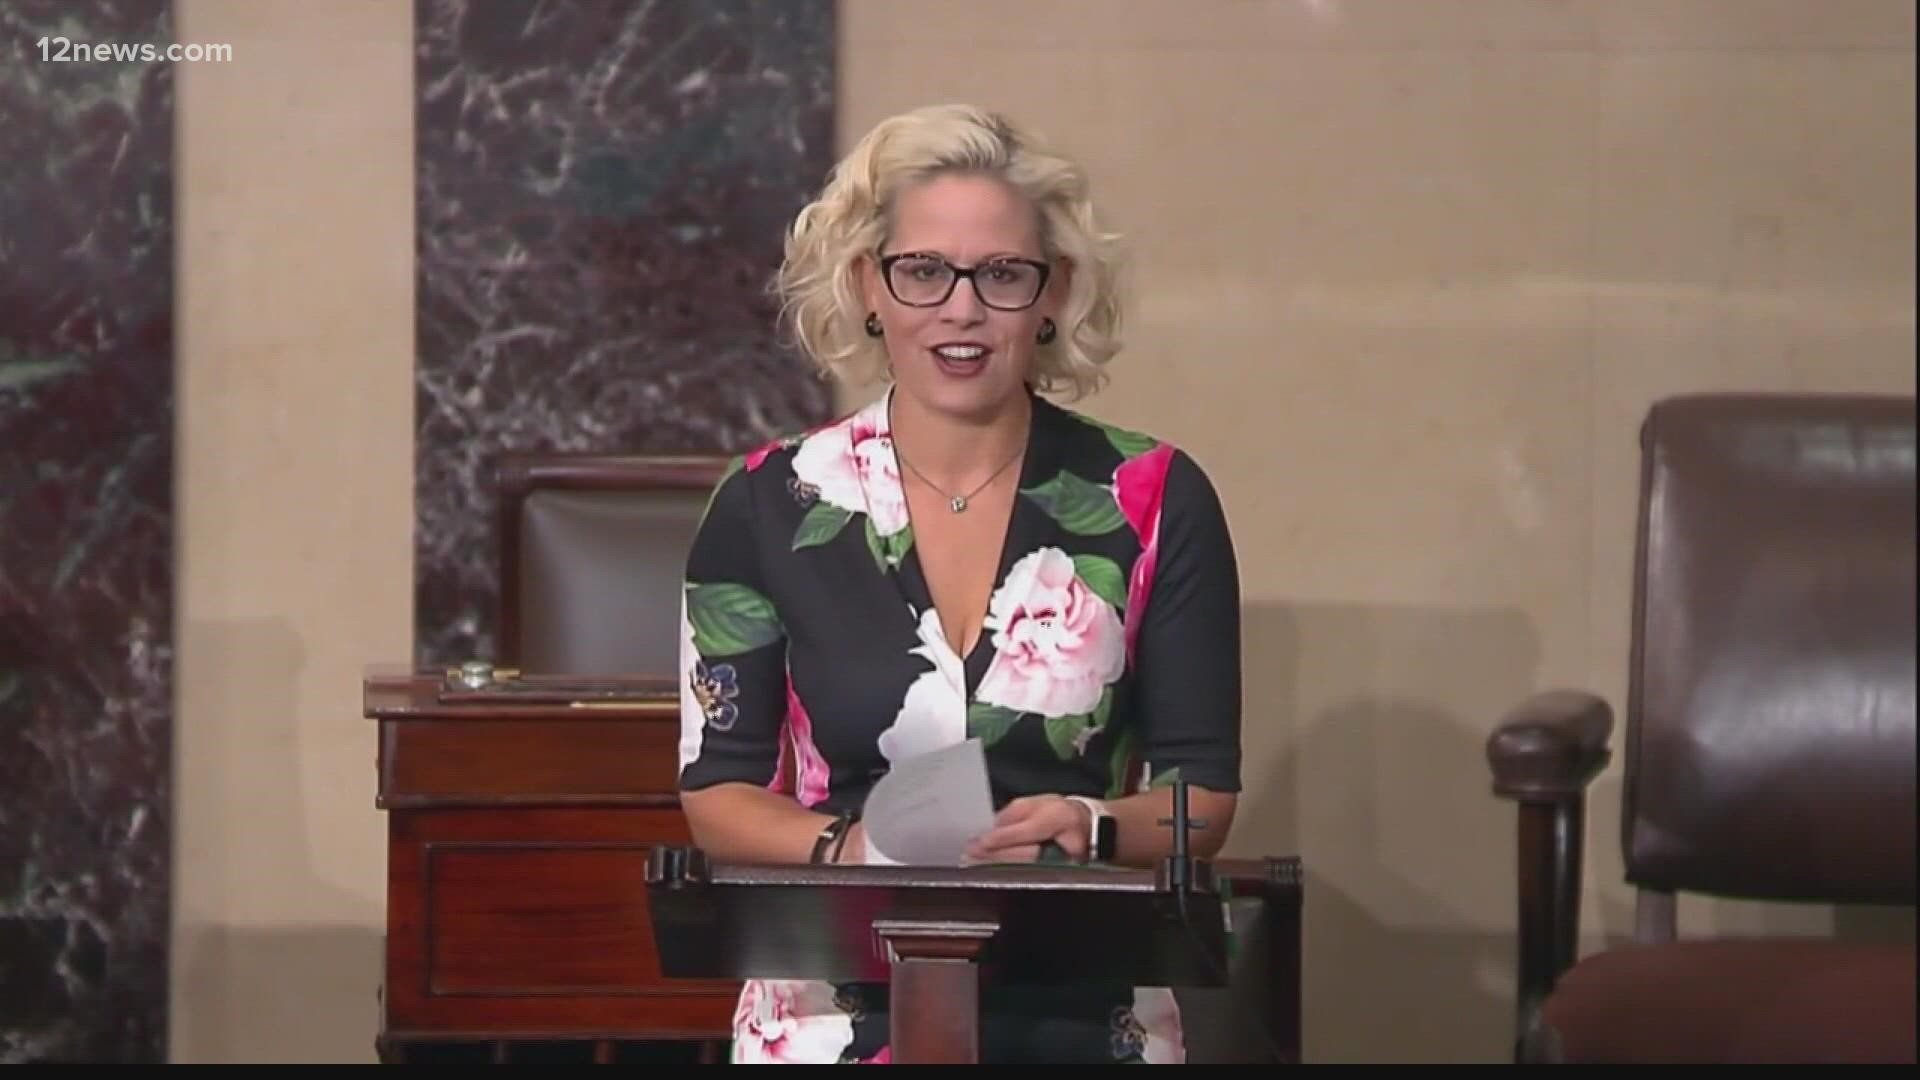 Five veterans who act as advisors to Senator Sinema have stepped down in protest of her position on key issues. They criticized her refusal to change the filibuster.